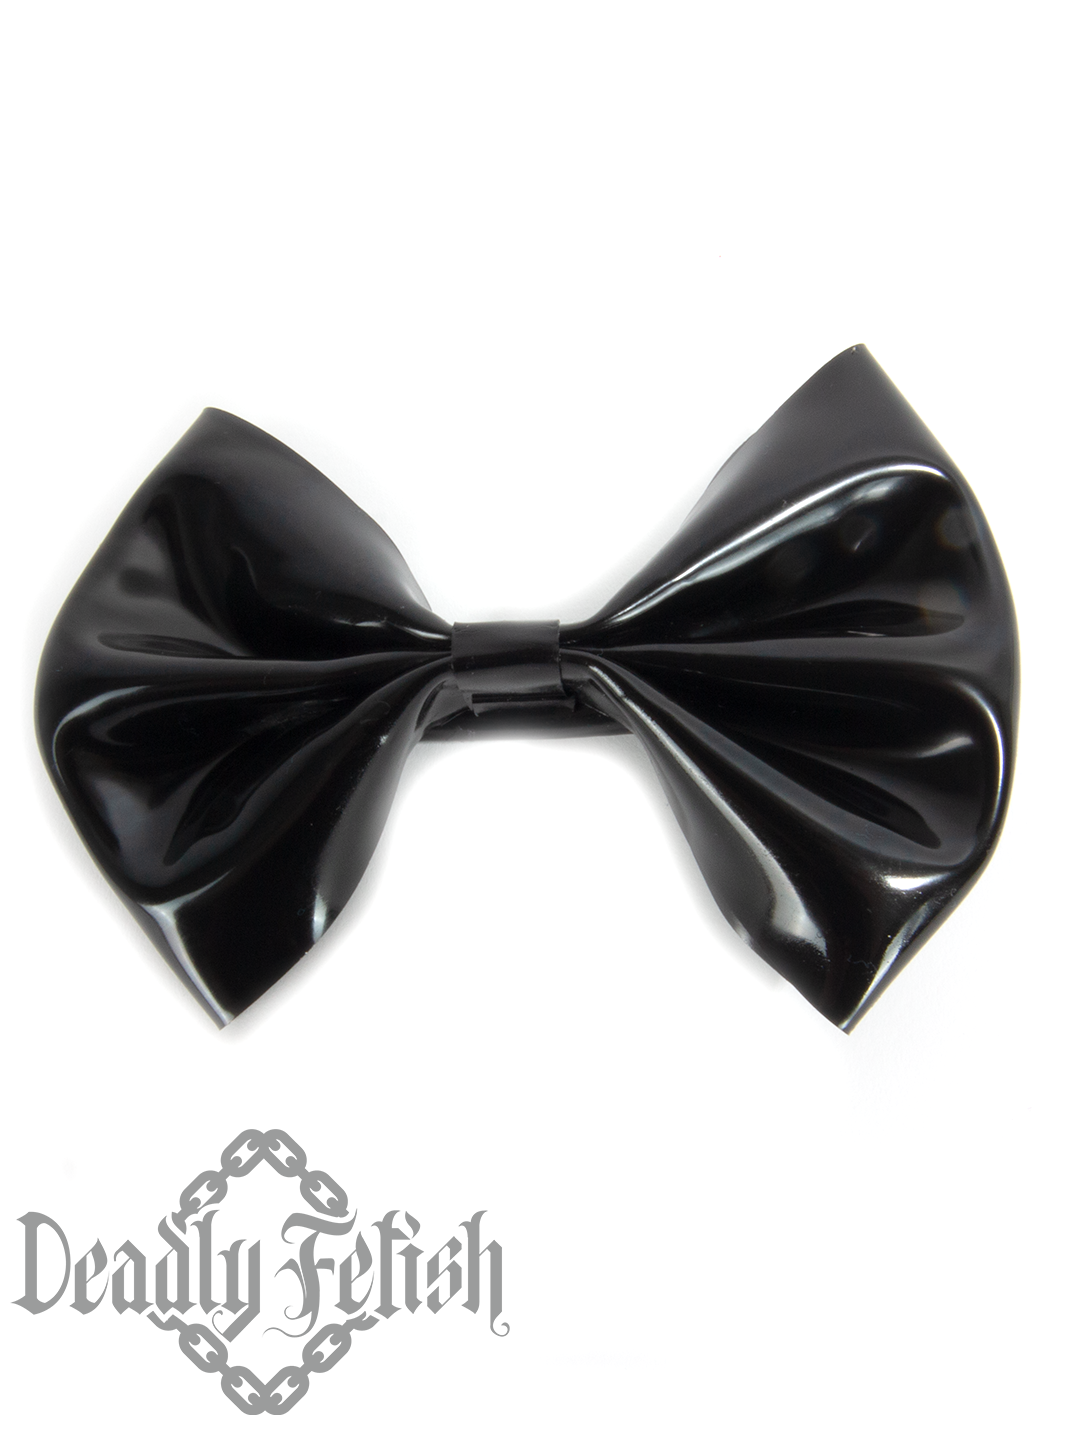 Deadly Fetish Made-To-Order Latex: Bow Clip